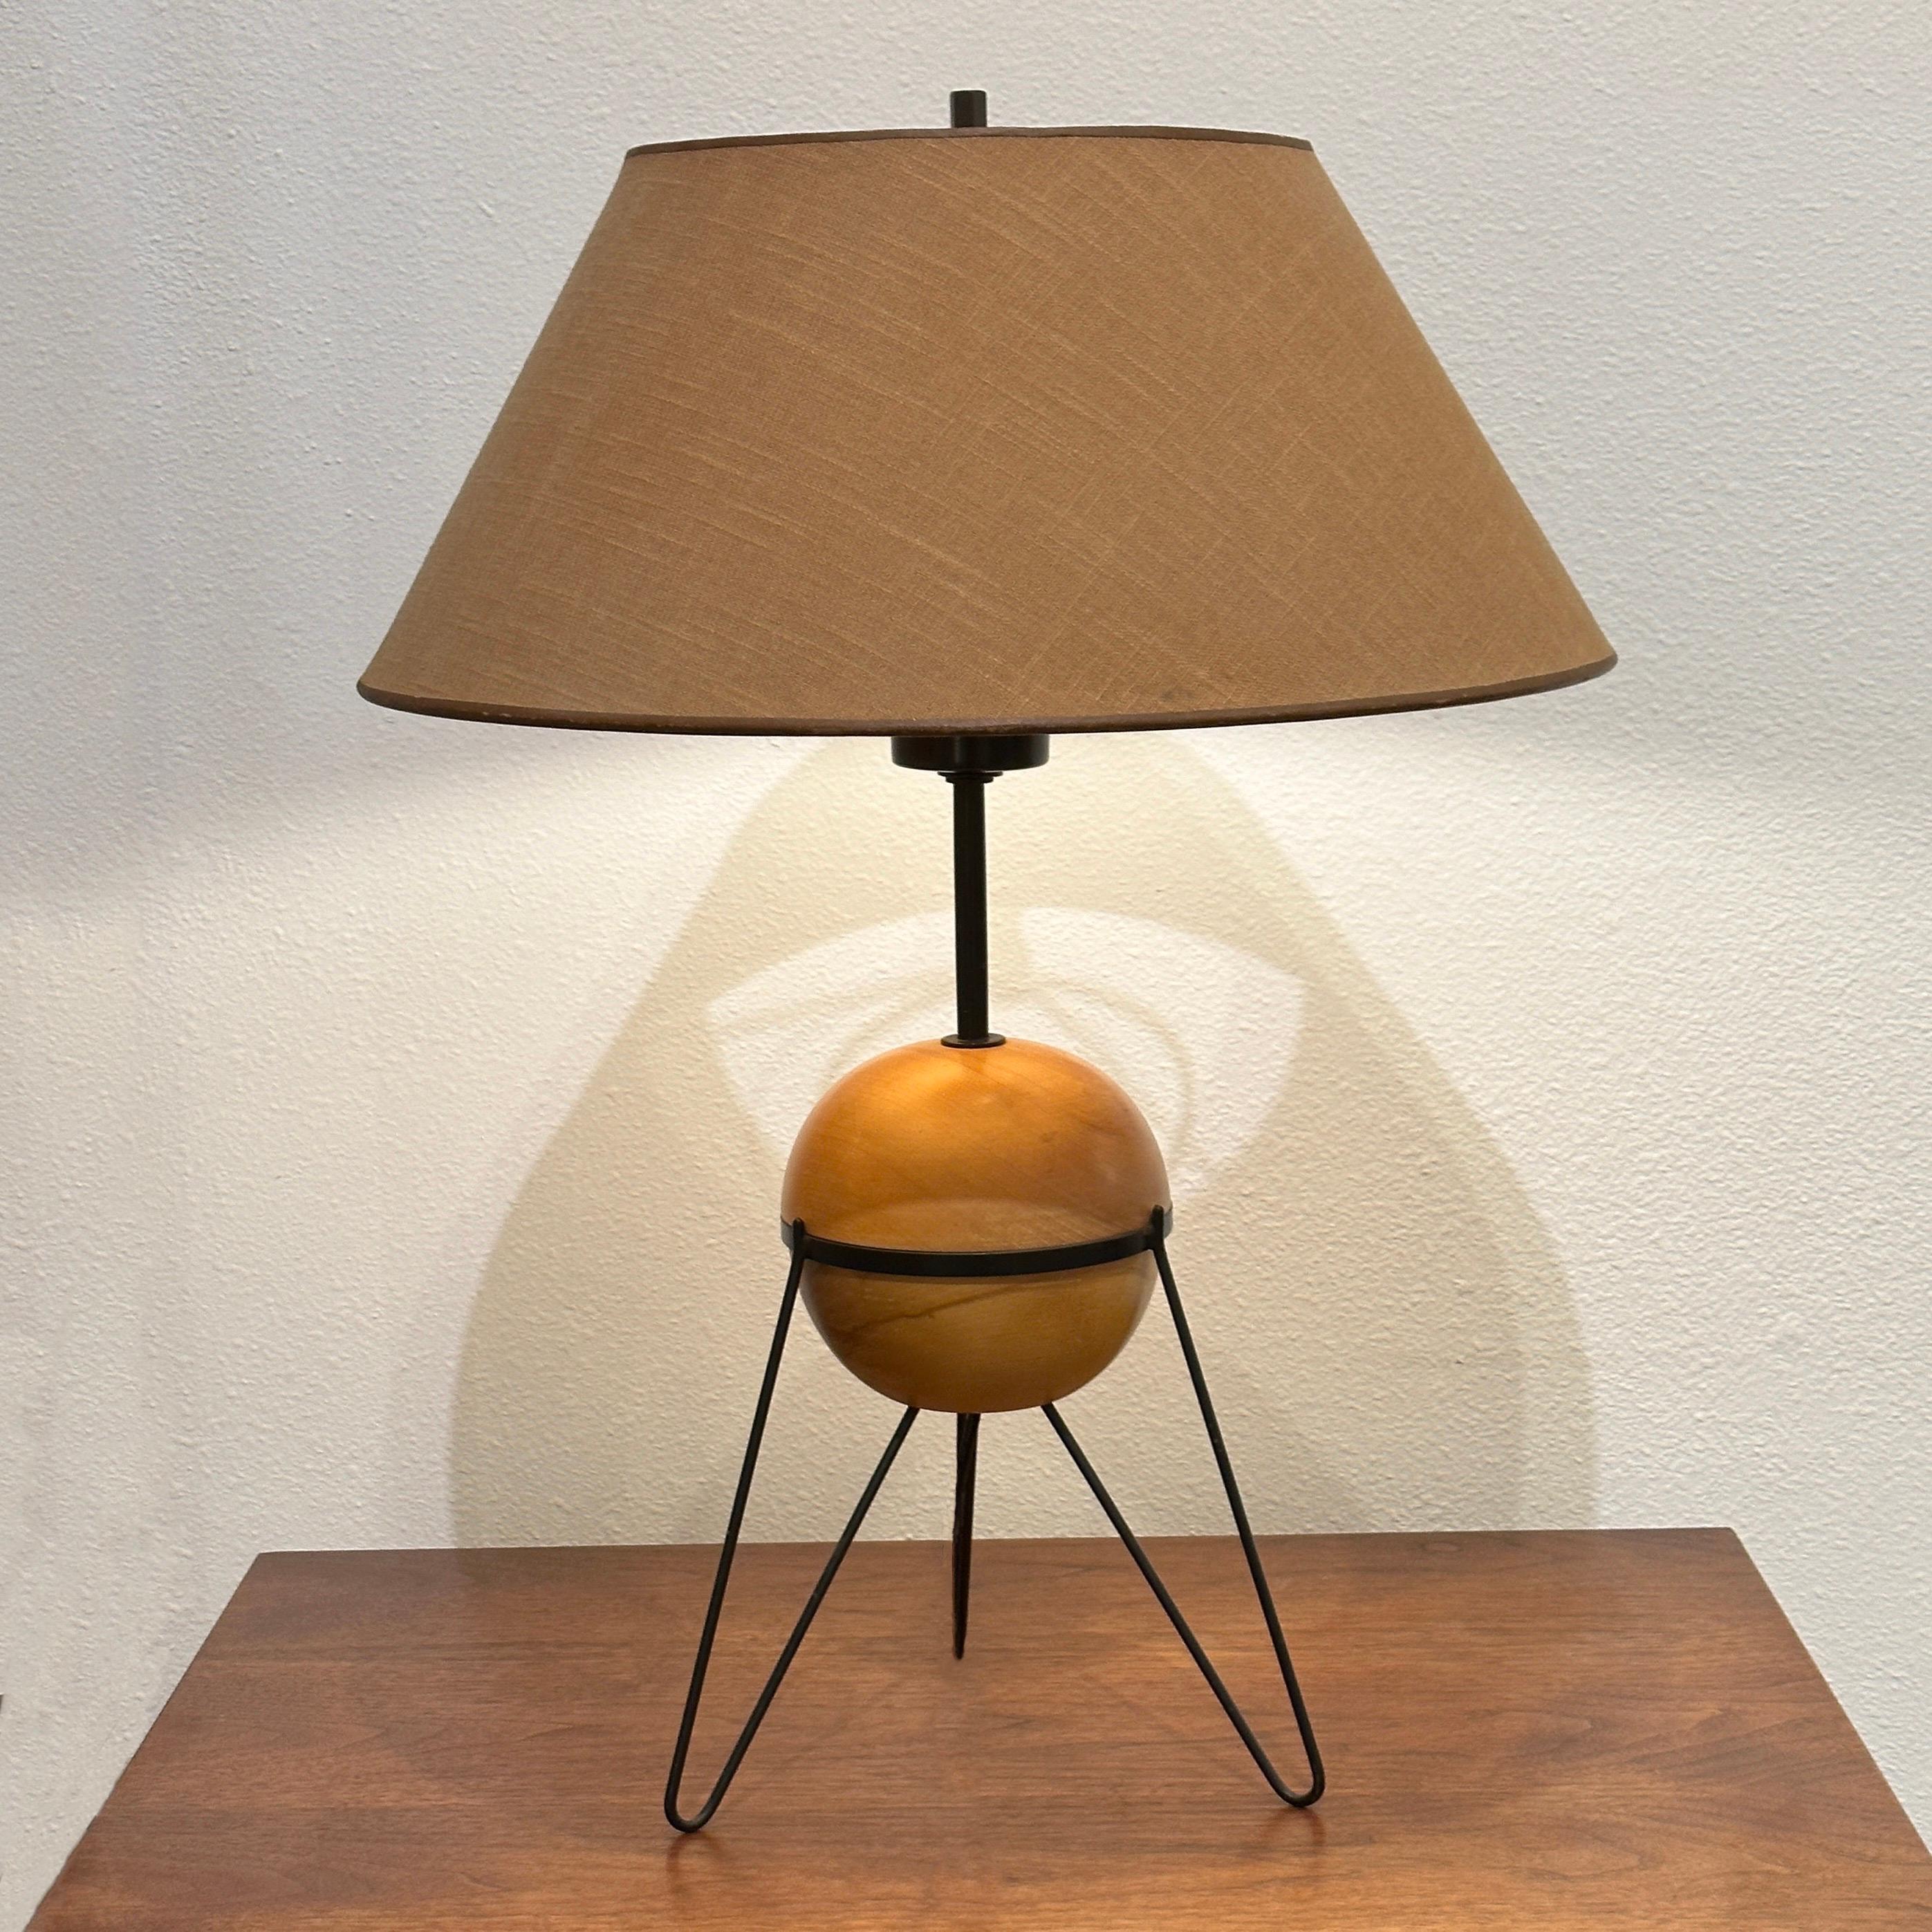 Rare table lamp designed by Yasha Heifetz for The Heifetz Company in the 1950s, consisting of a natural birch globe with painted metal tripod hairpin legs. This example features the original shade in a tan linen on styrene.

Measures 26